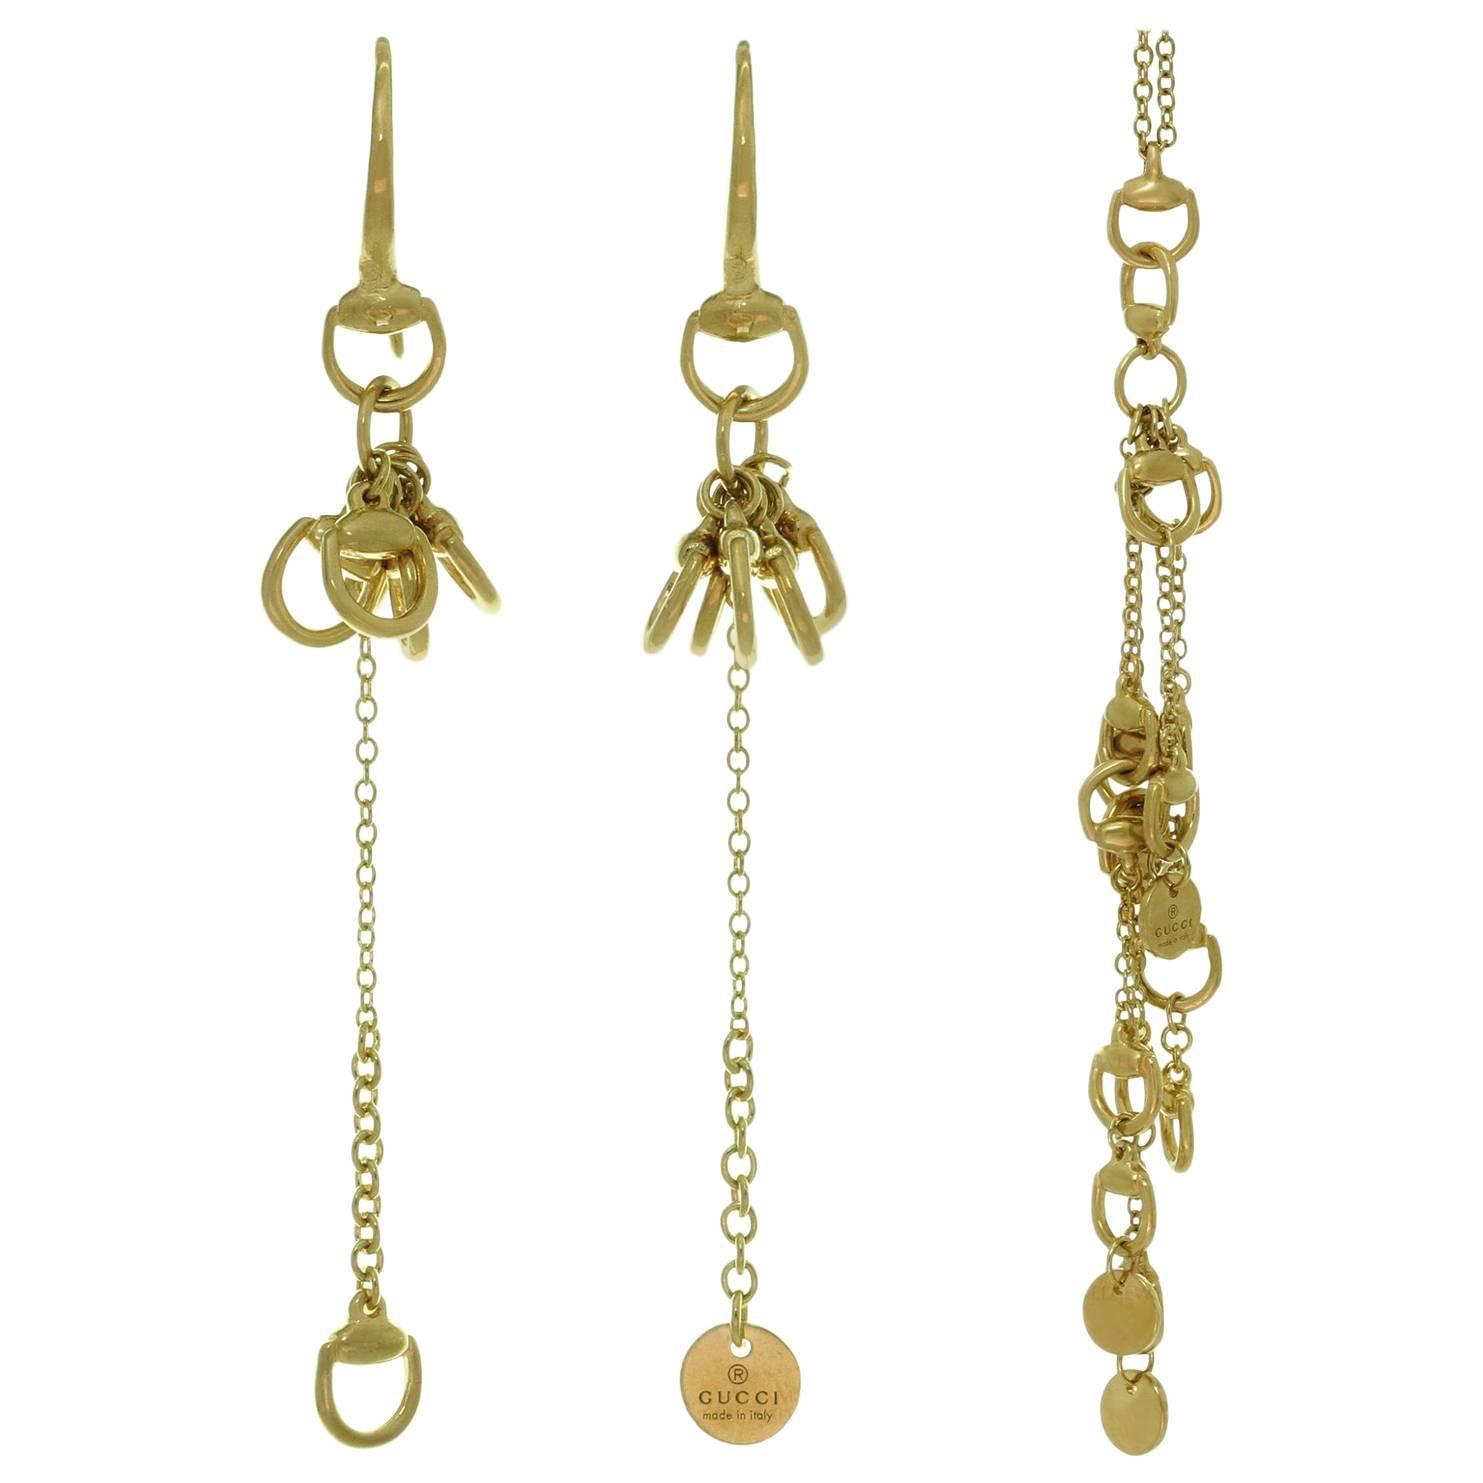 Gucci Horsebit Yellow Gold Necklace and Dangle Earrings Set